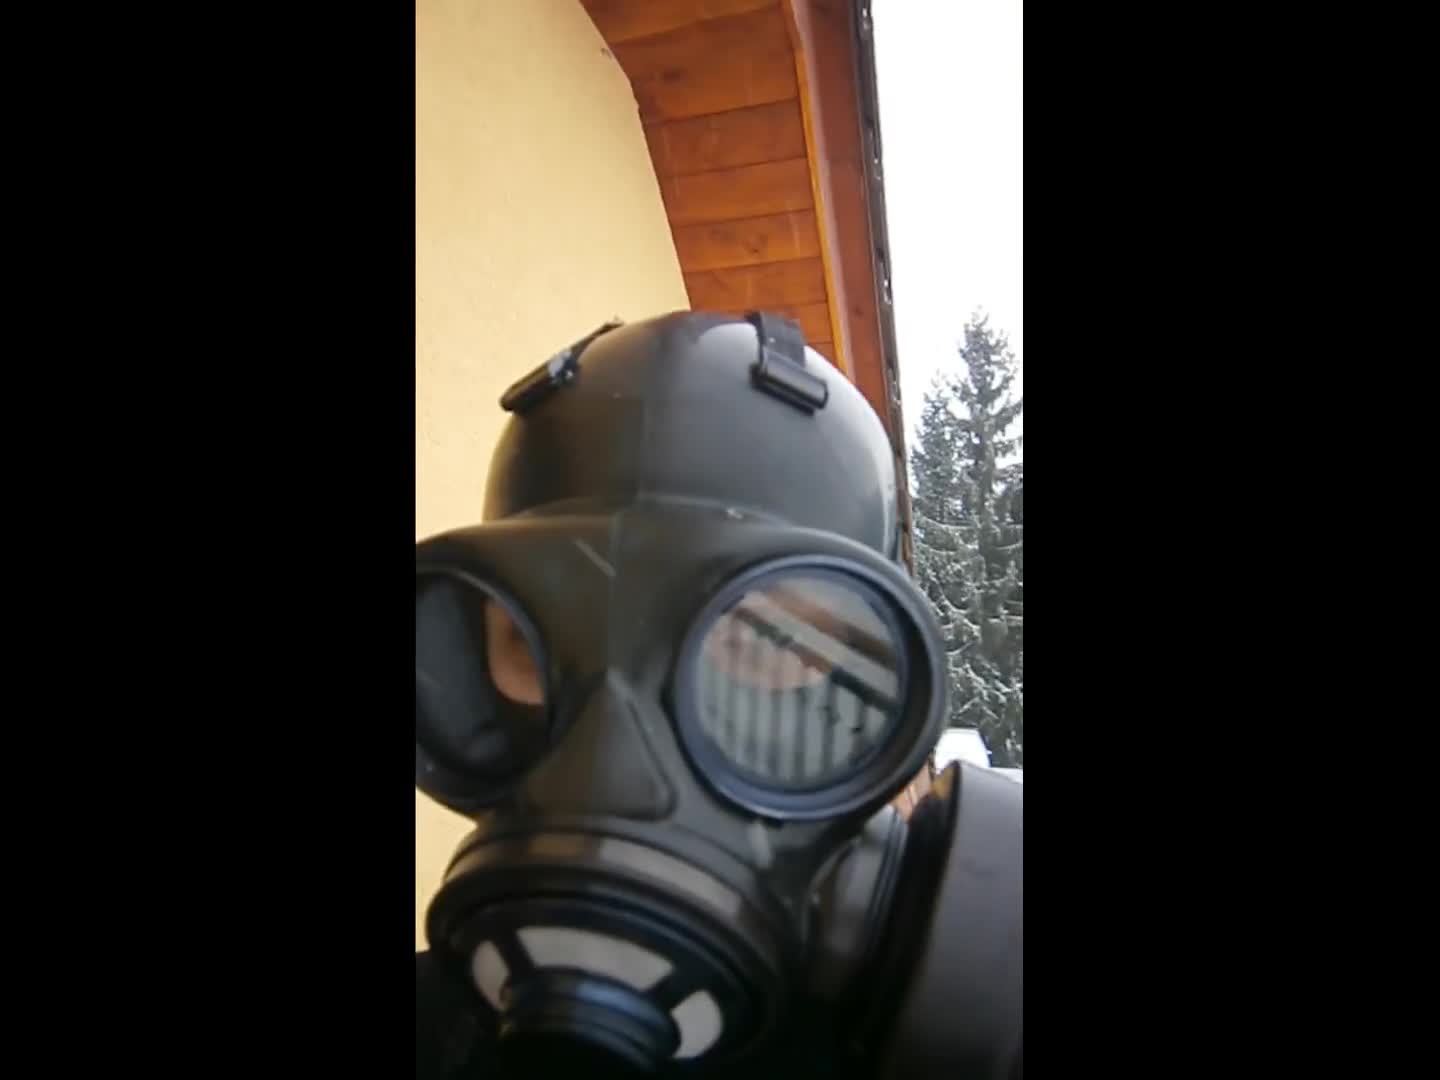 Latex Rubber Gas Mask (Please click subscribe to get updates of new videos)